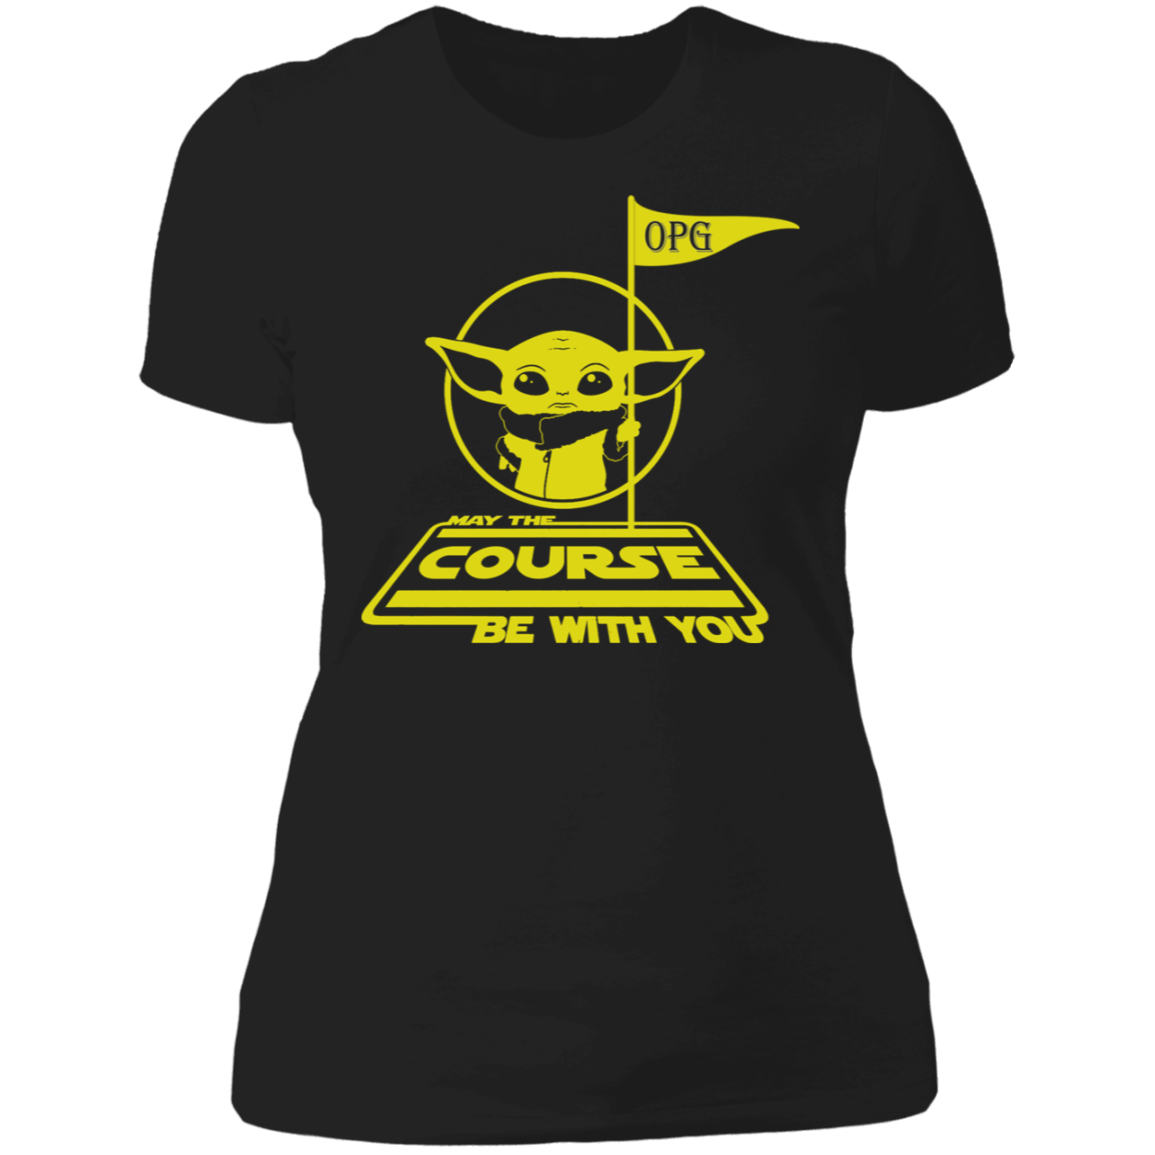 OPG Custom Design #21. May the course be with you. Star Wars Parody and Fan Art. Ladies' Boyfriend T-Shirt